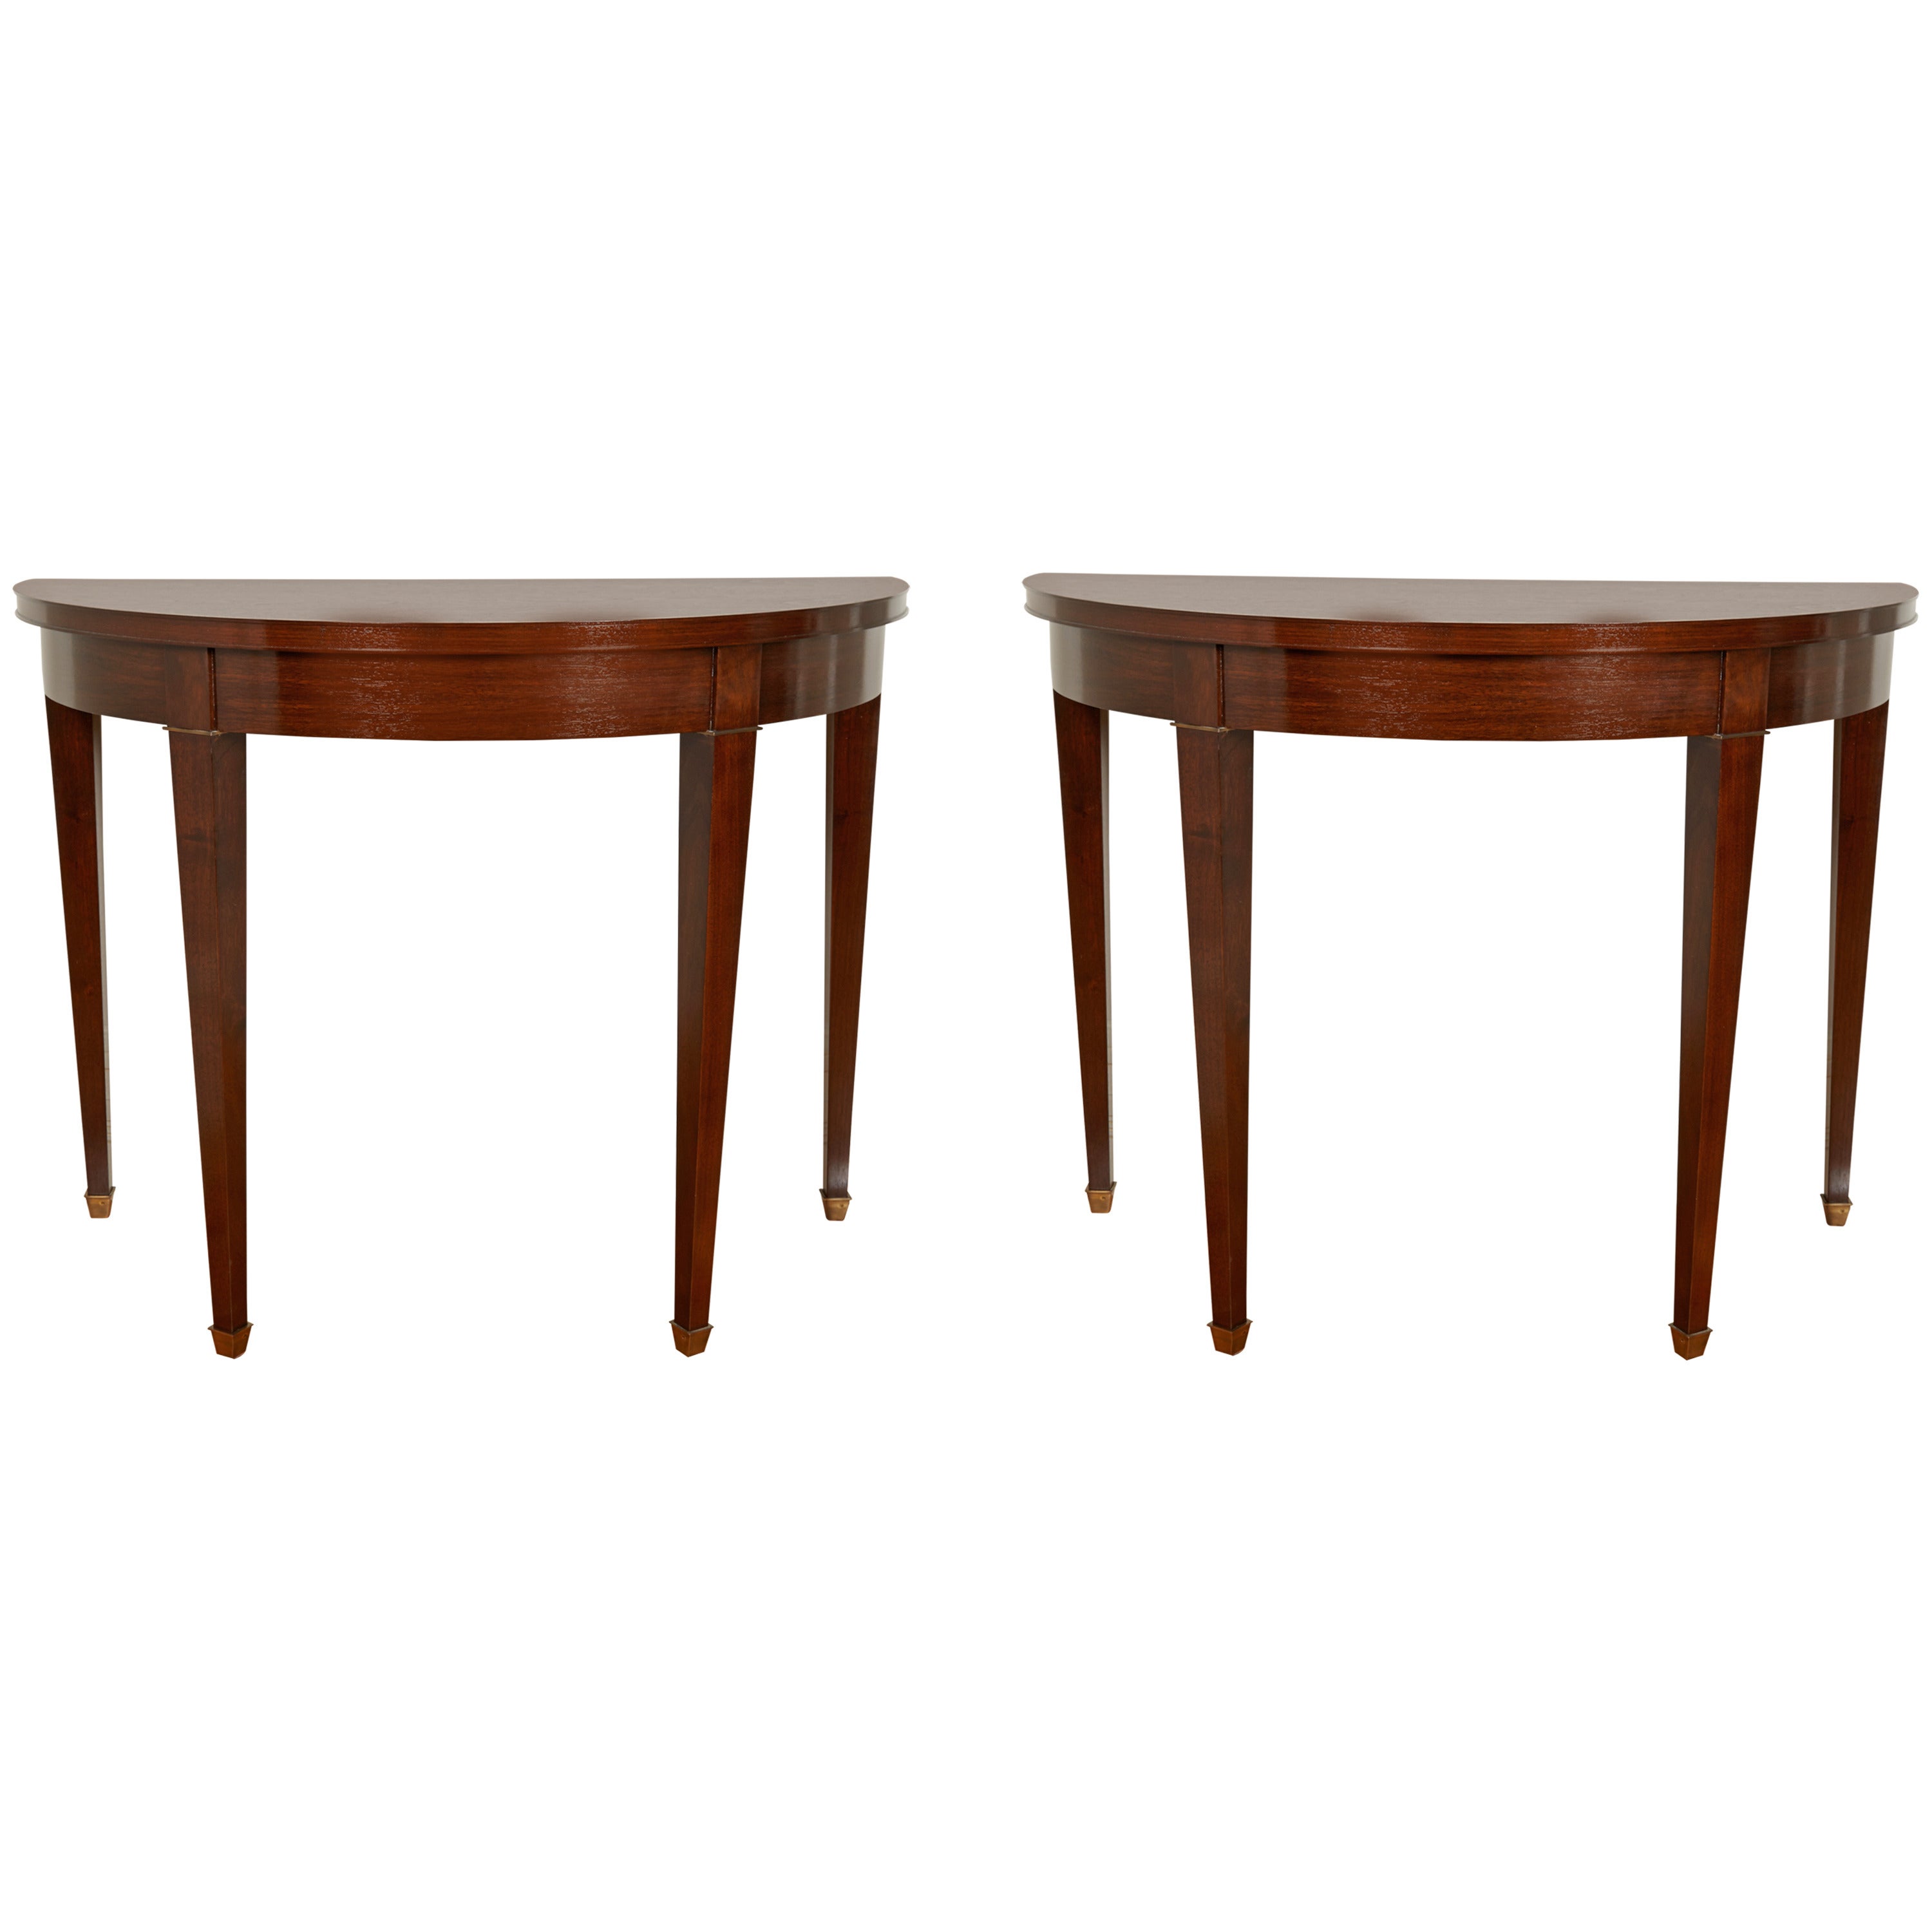 Pair of Neoclassical Style Walnut Demilune Console Tables